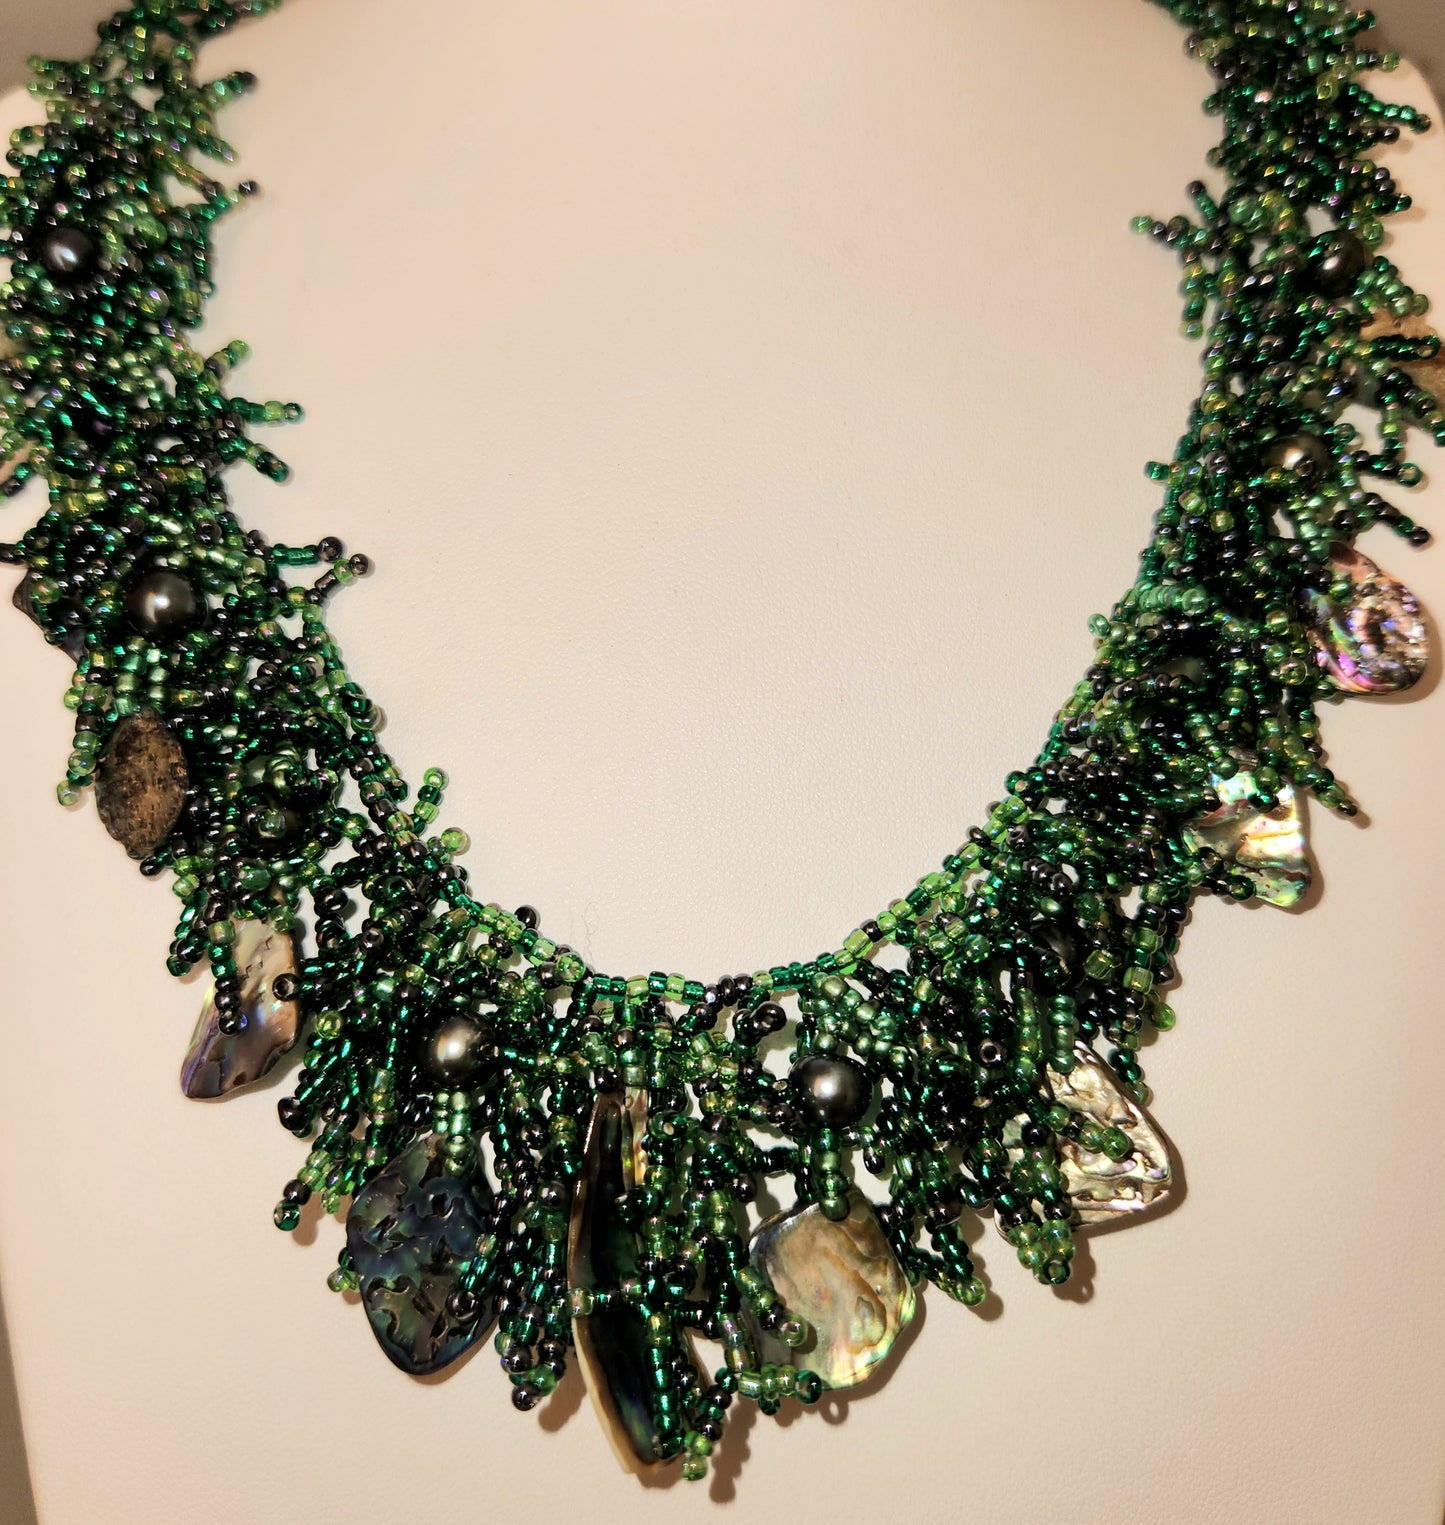 Hand made Coral Form Necklace - Ocean Green Tahitian Black Pearls and Abalone